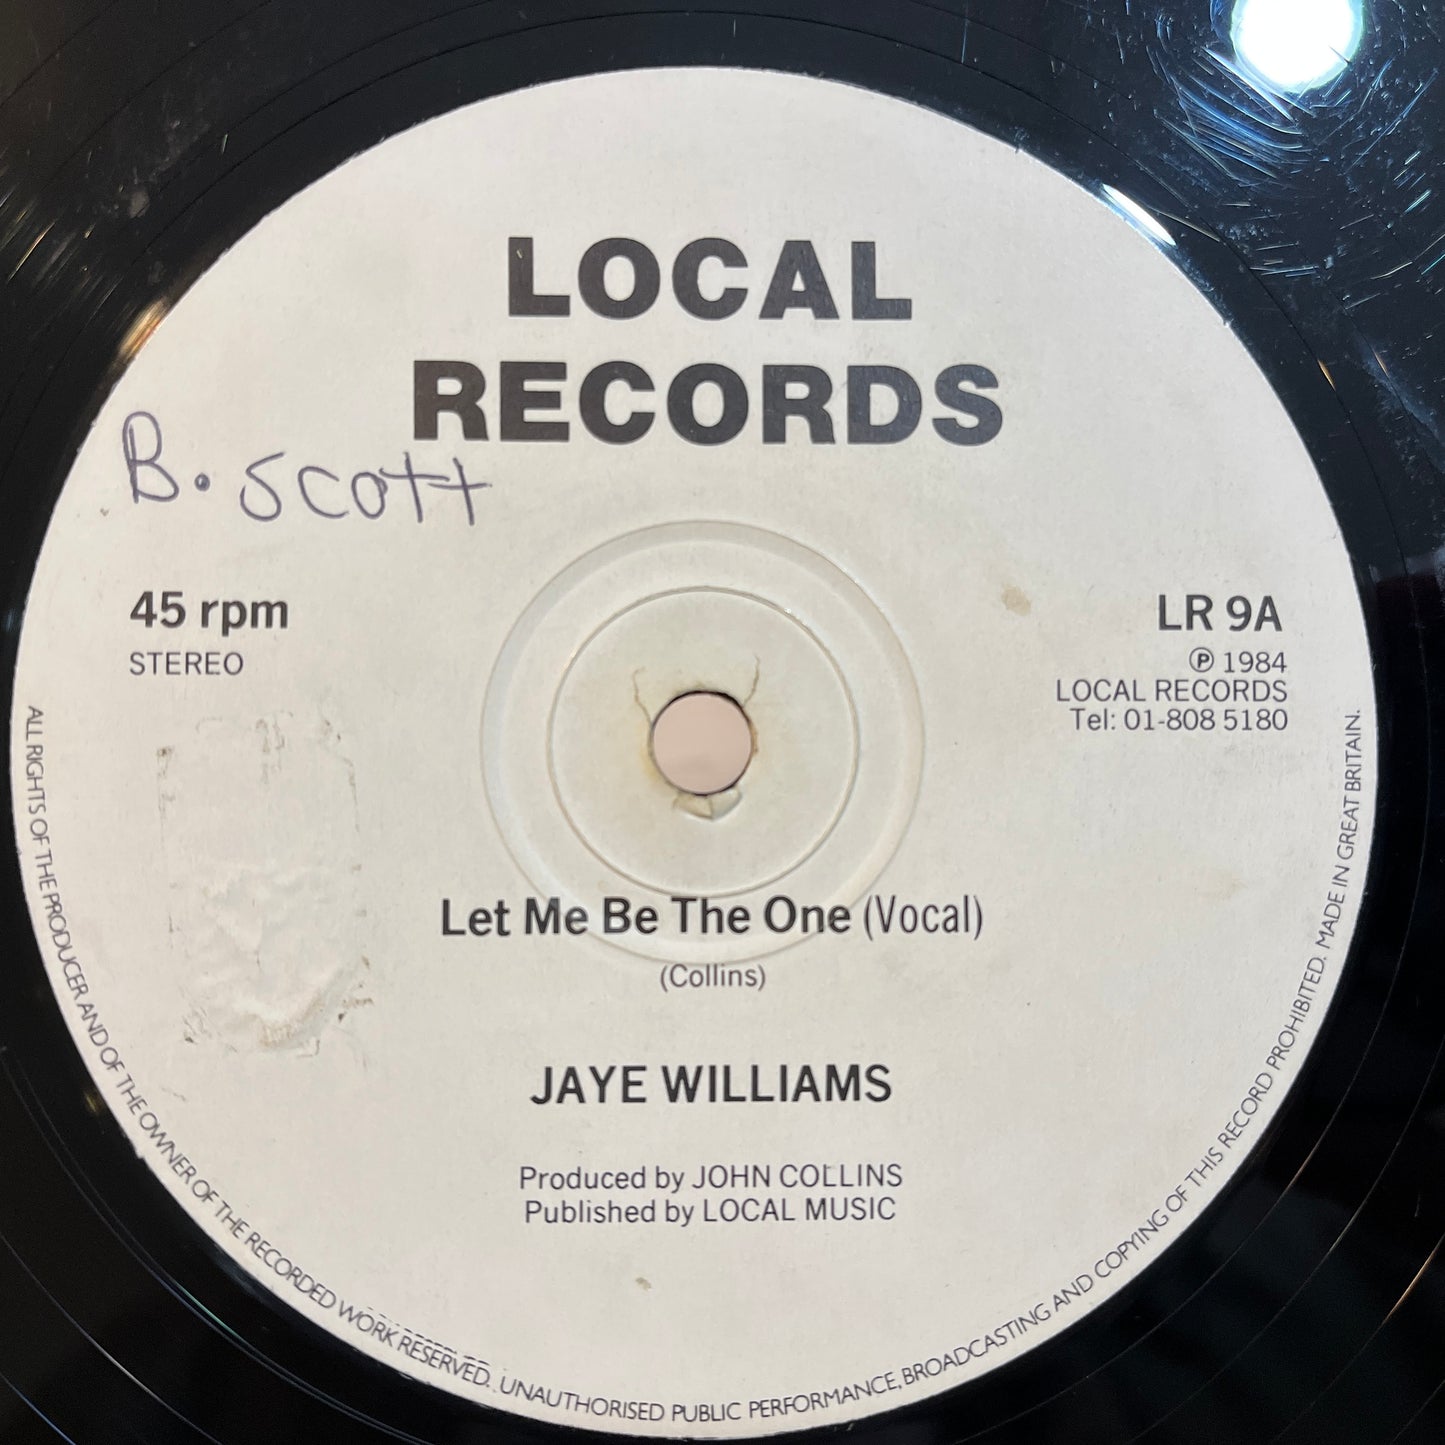 Jaye Williams – Let Me Be The One